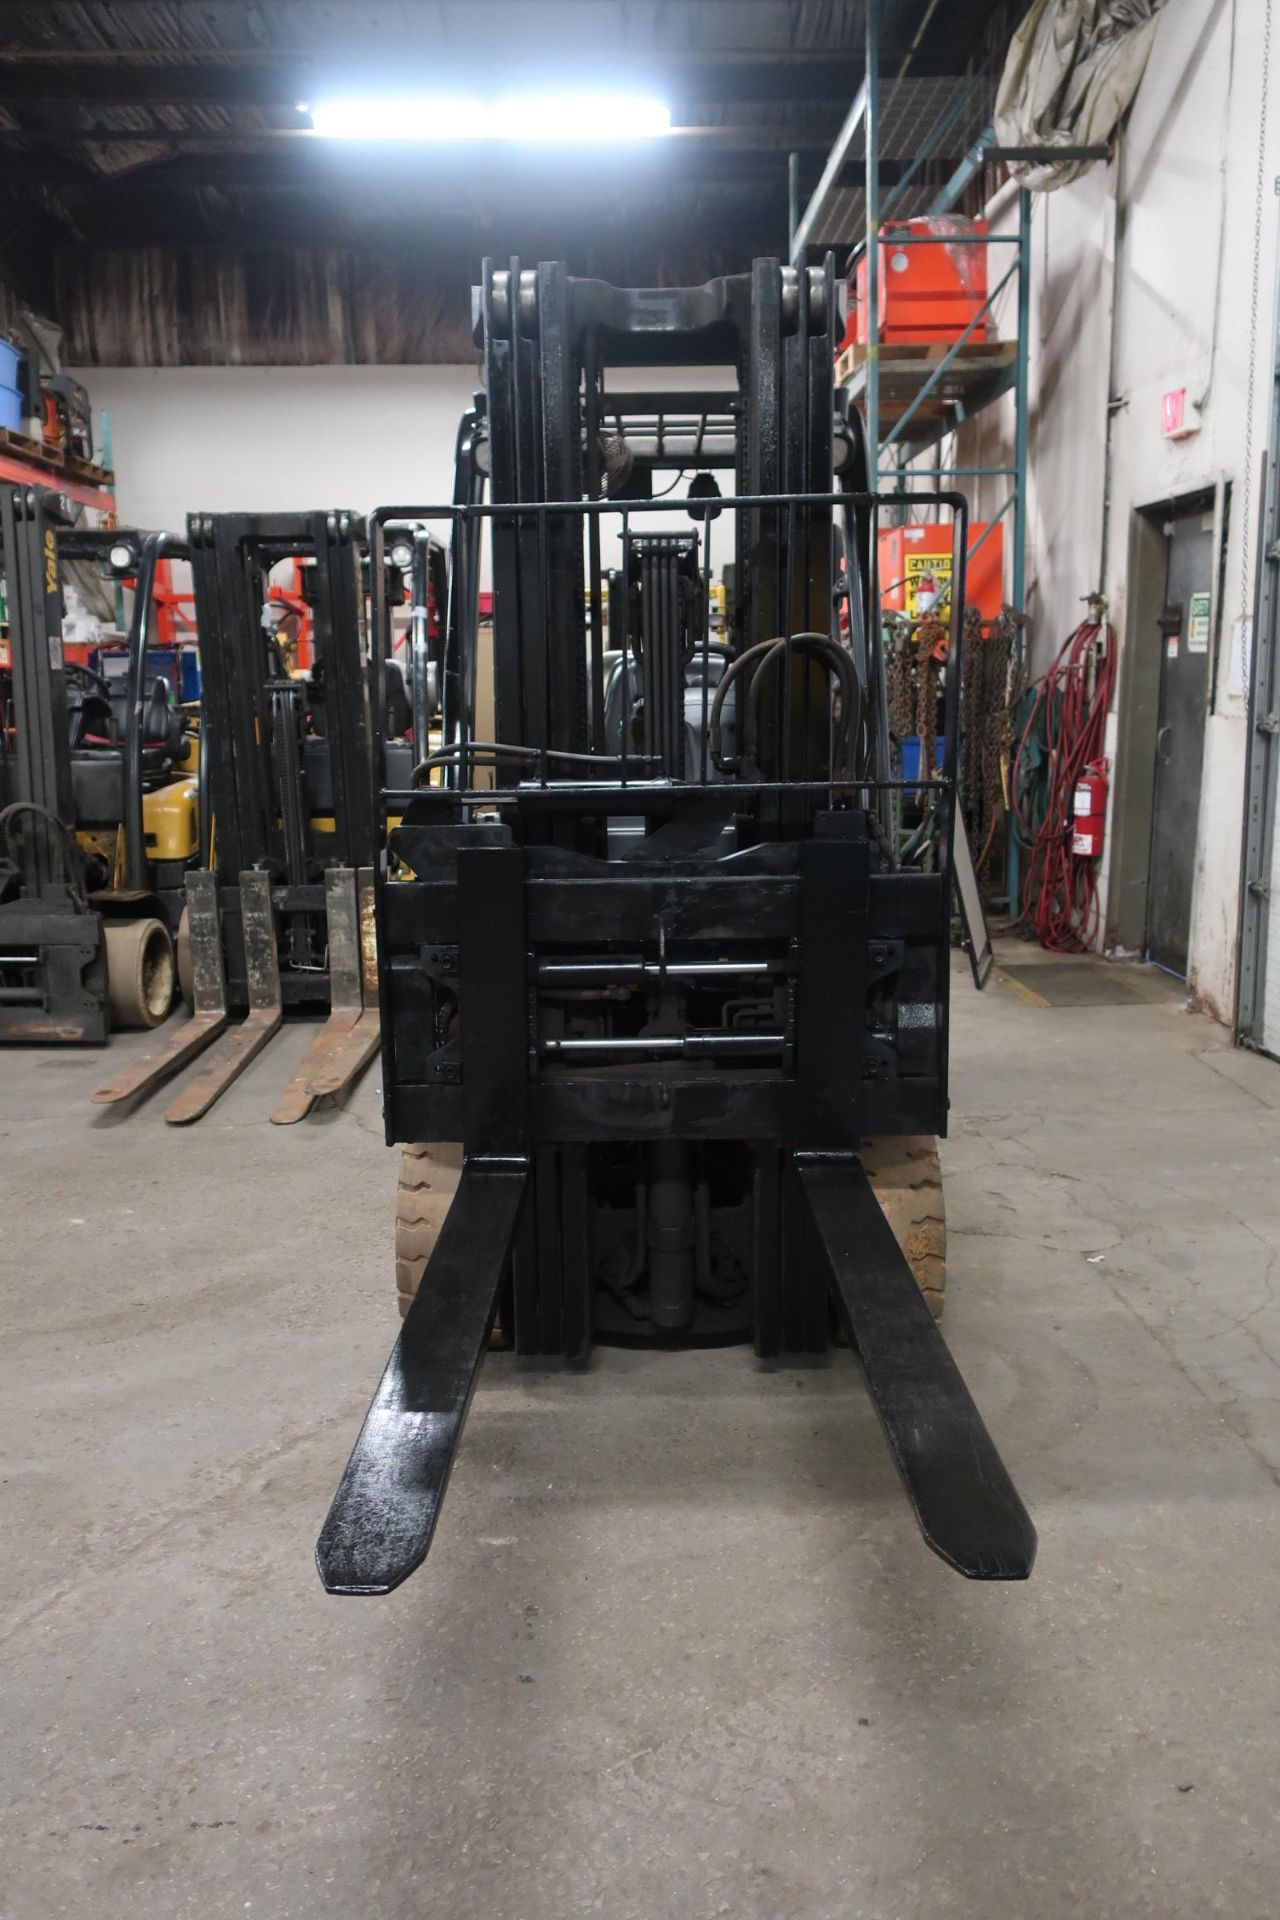 FREE CUSTOMS - 2017 Yale 7000lbs Capacity Forklift with 3-stage mast - LPG (propane) with - Image 2 of 2